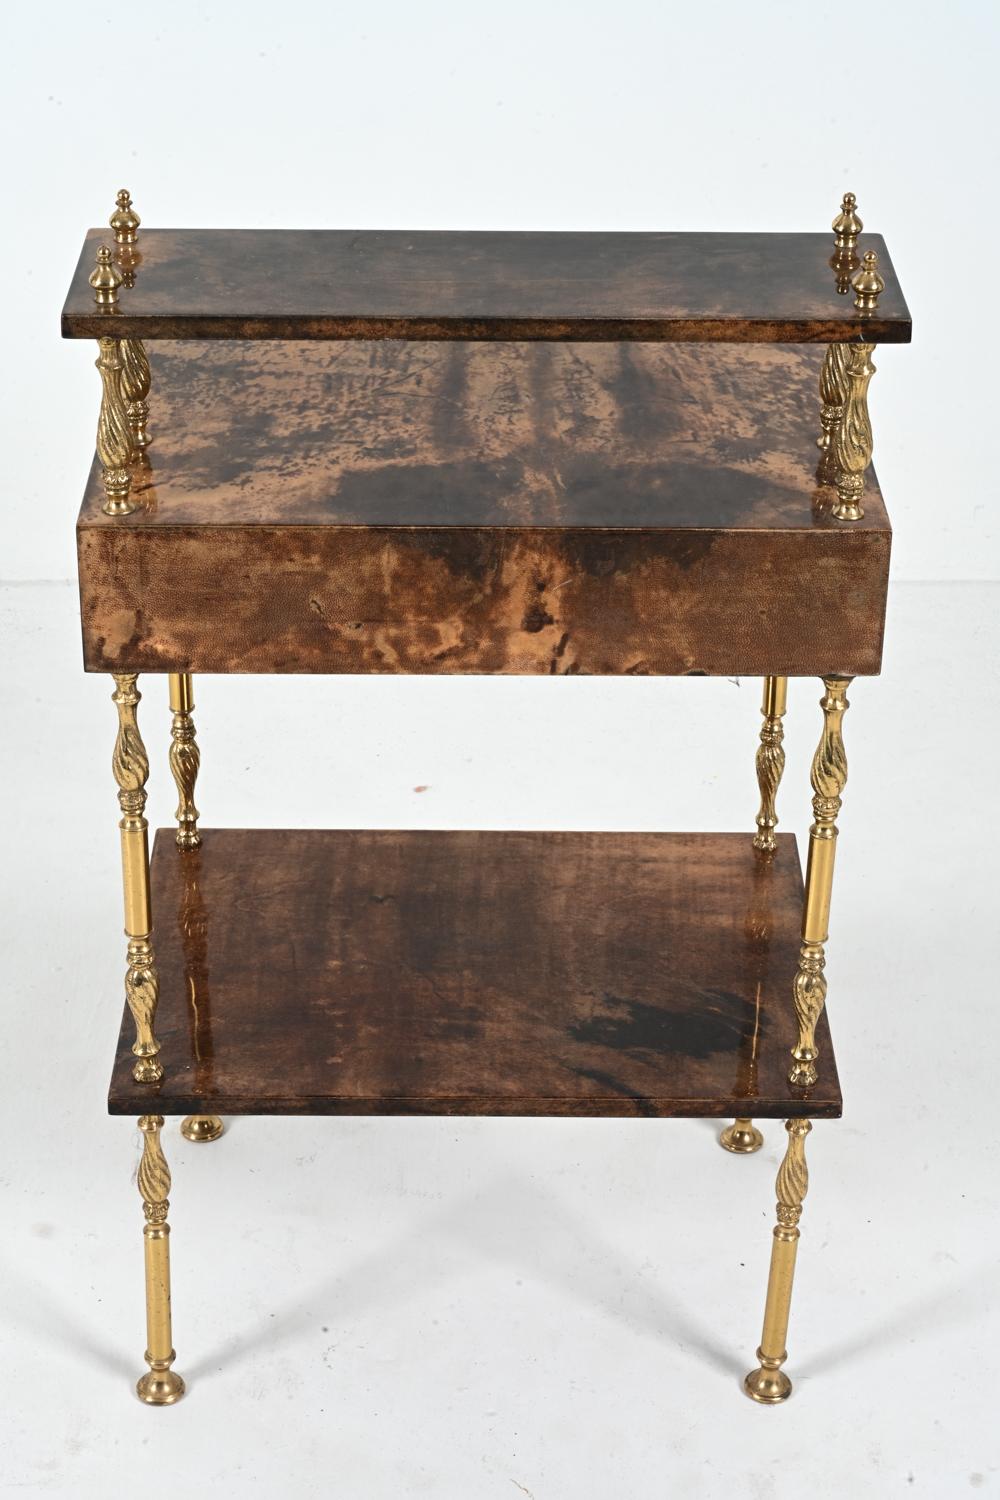 Aldo Tura Lacquered Goatskin & Brass Occasional Table, c. 1960's For Sale 8